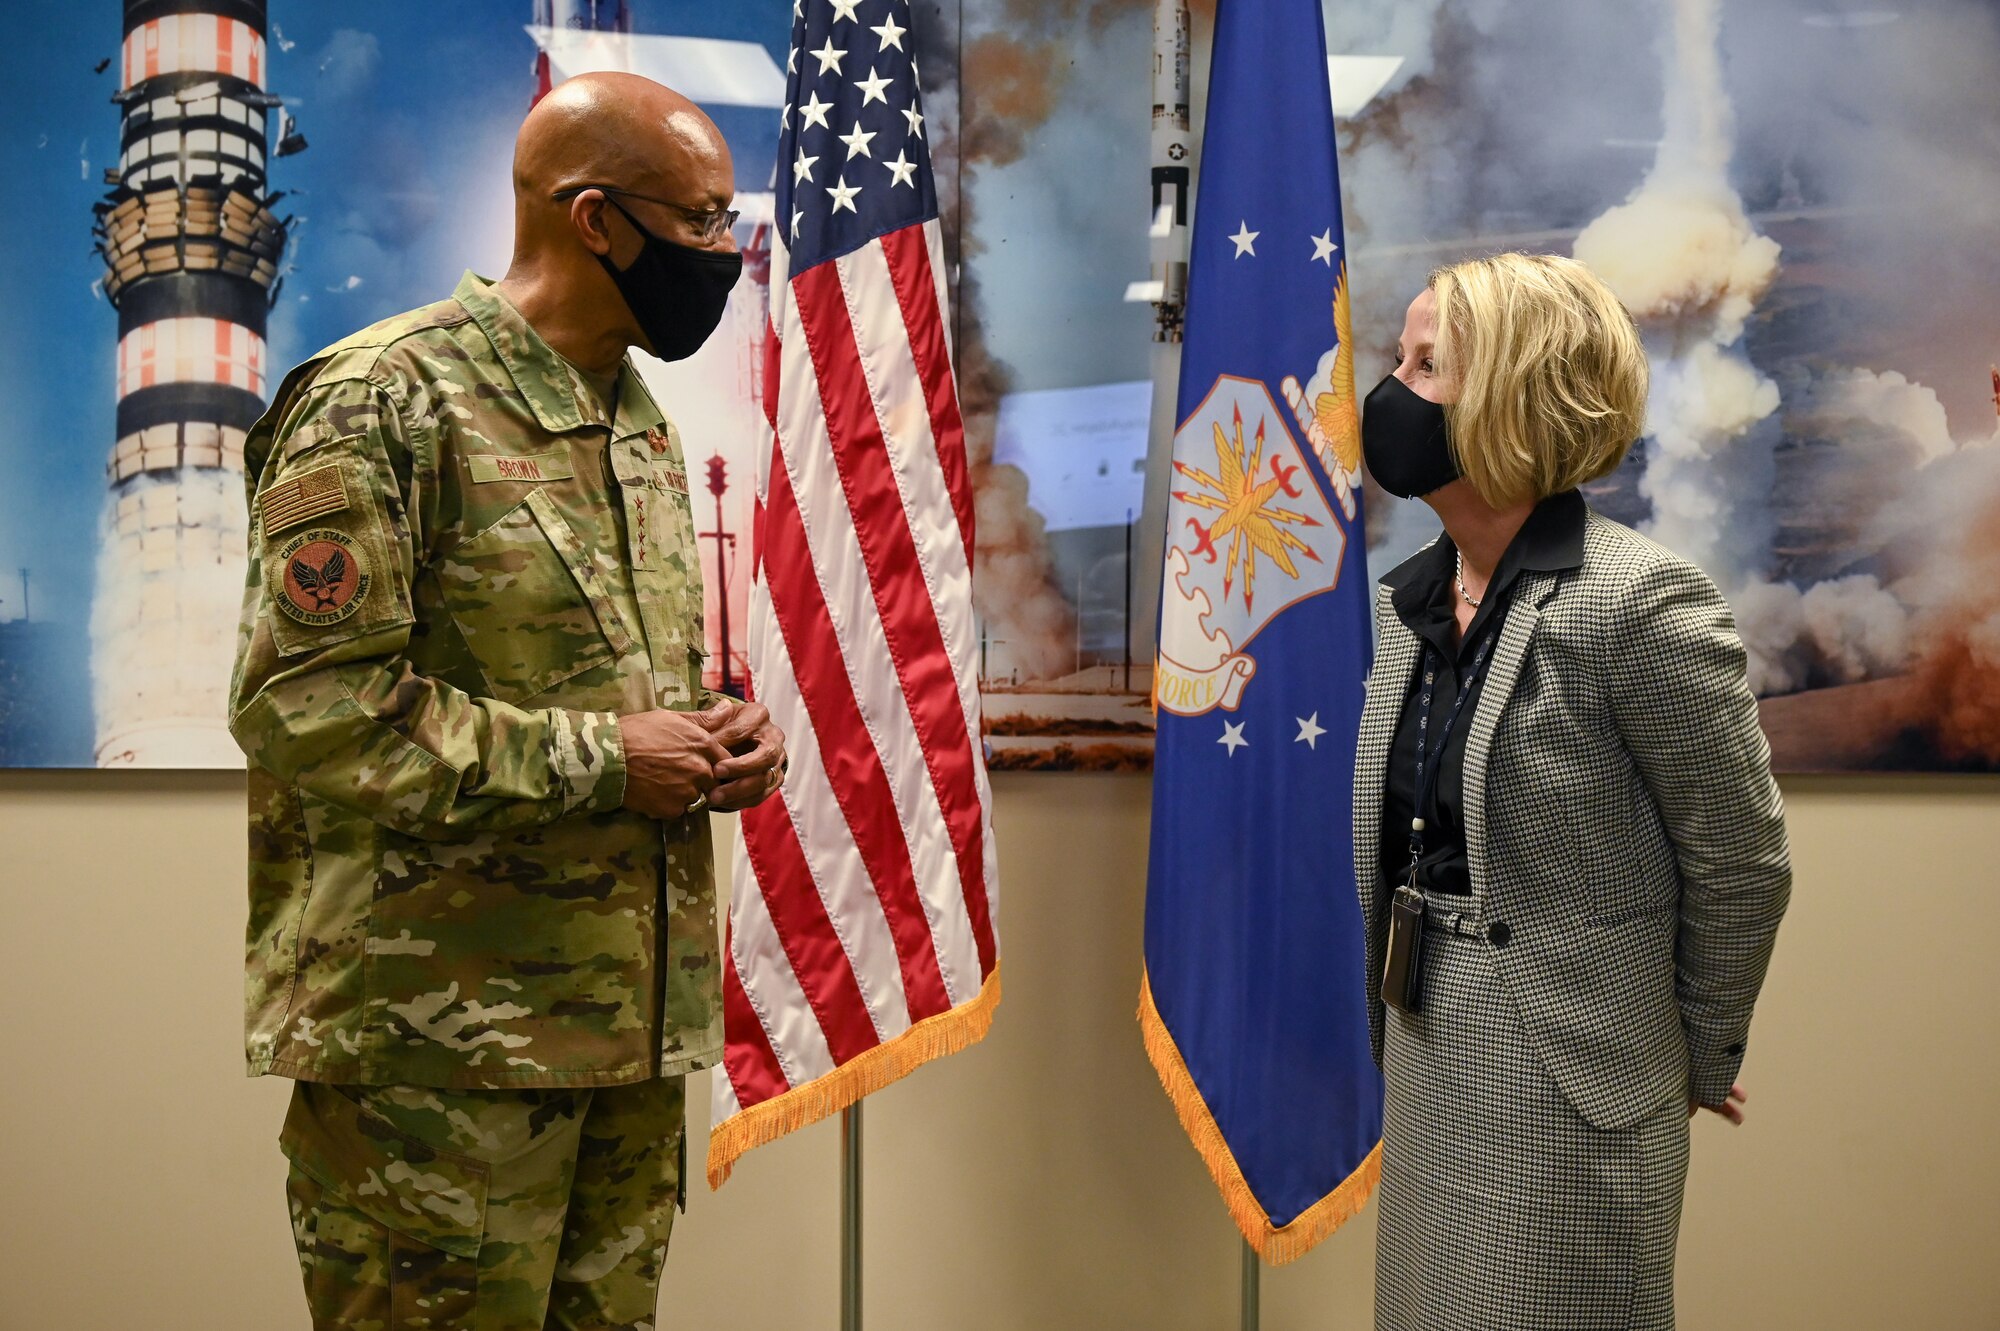 Air Force Chief of Staff Gen. Charles Q. Brown, Jr. speaks with Jarie MIckelson, GBSD deputy system program manager, before presenting her with a coin during a visit to Hill Air Force Base, Utah, March 2, 2021.